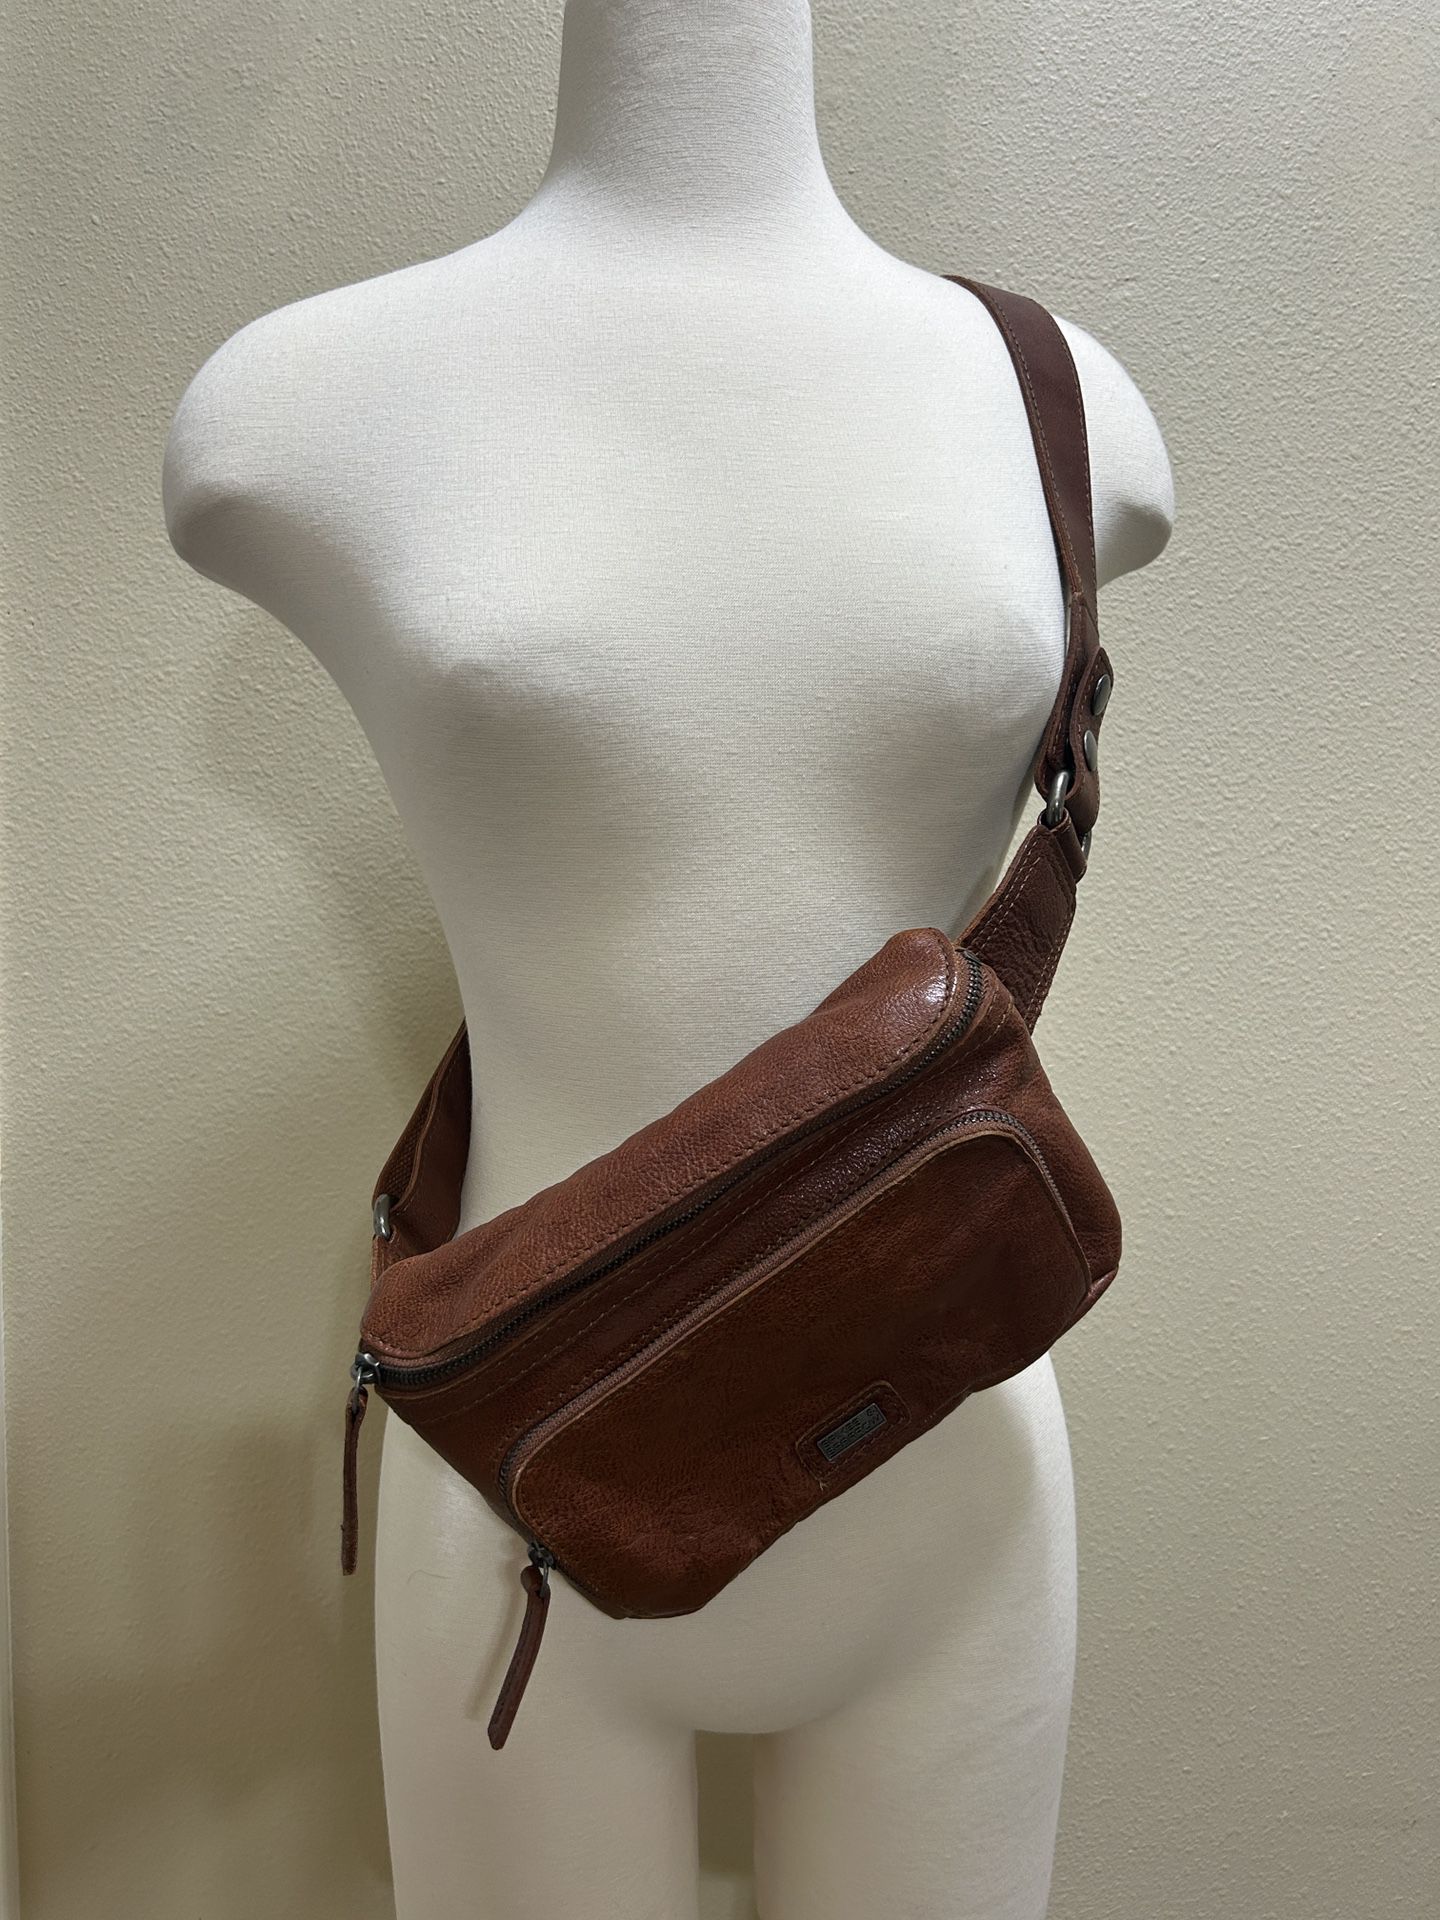 SPIKES & SPARROW BRANDY Leather Belt Fanny Pack Bag Brown Zippered Wide Strap